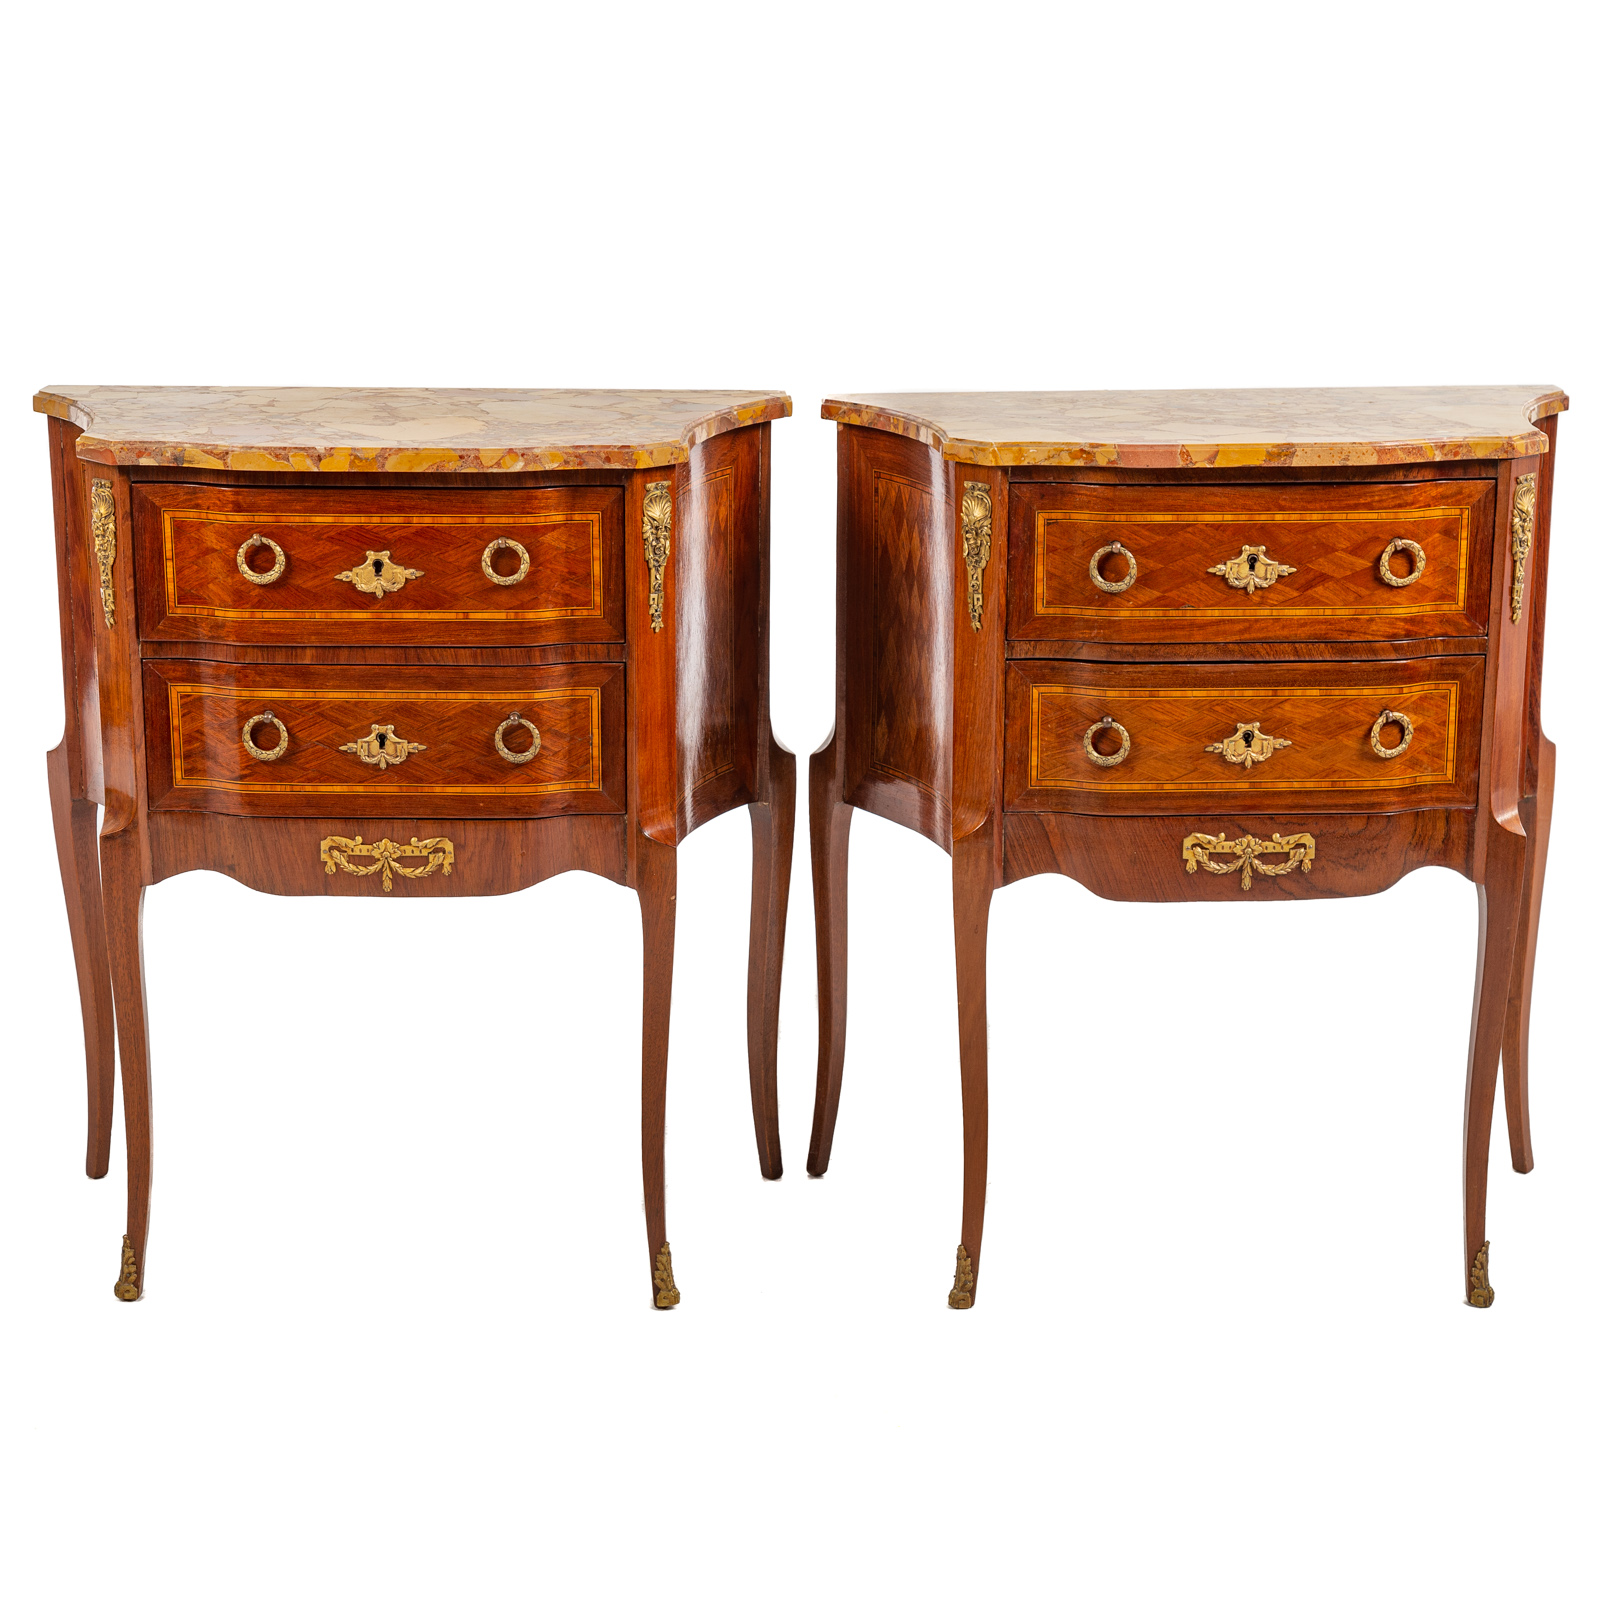 A PAIR OF LOUIS XV STYLE MARBLE 2e907b